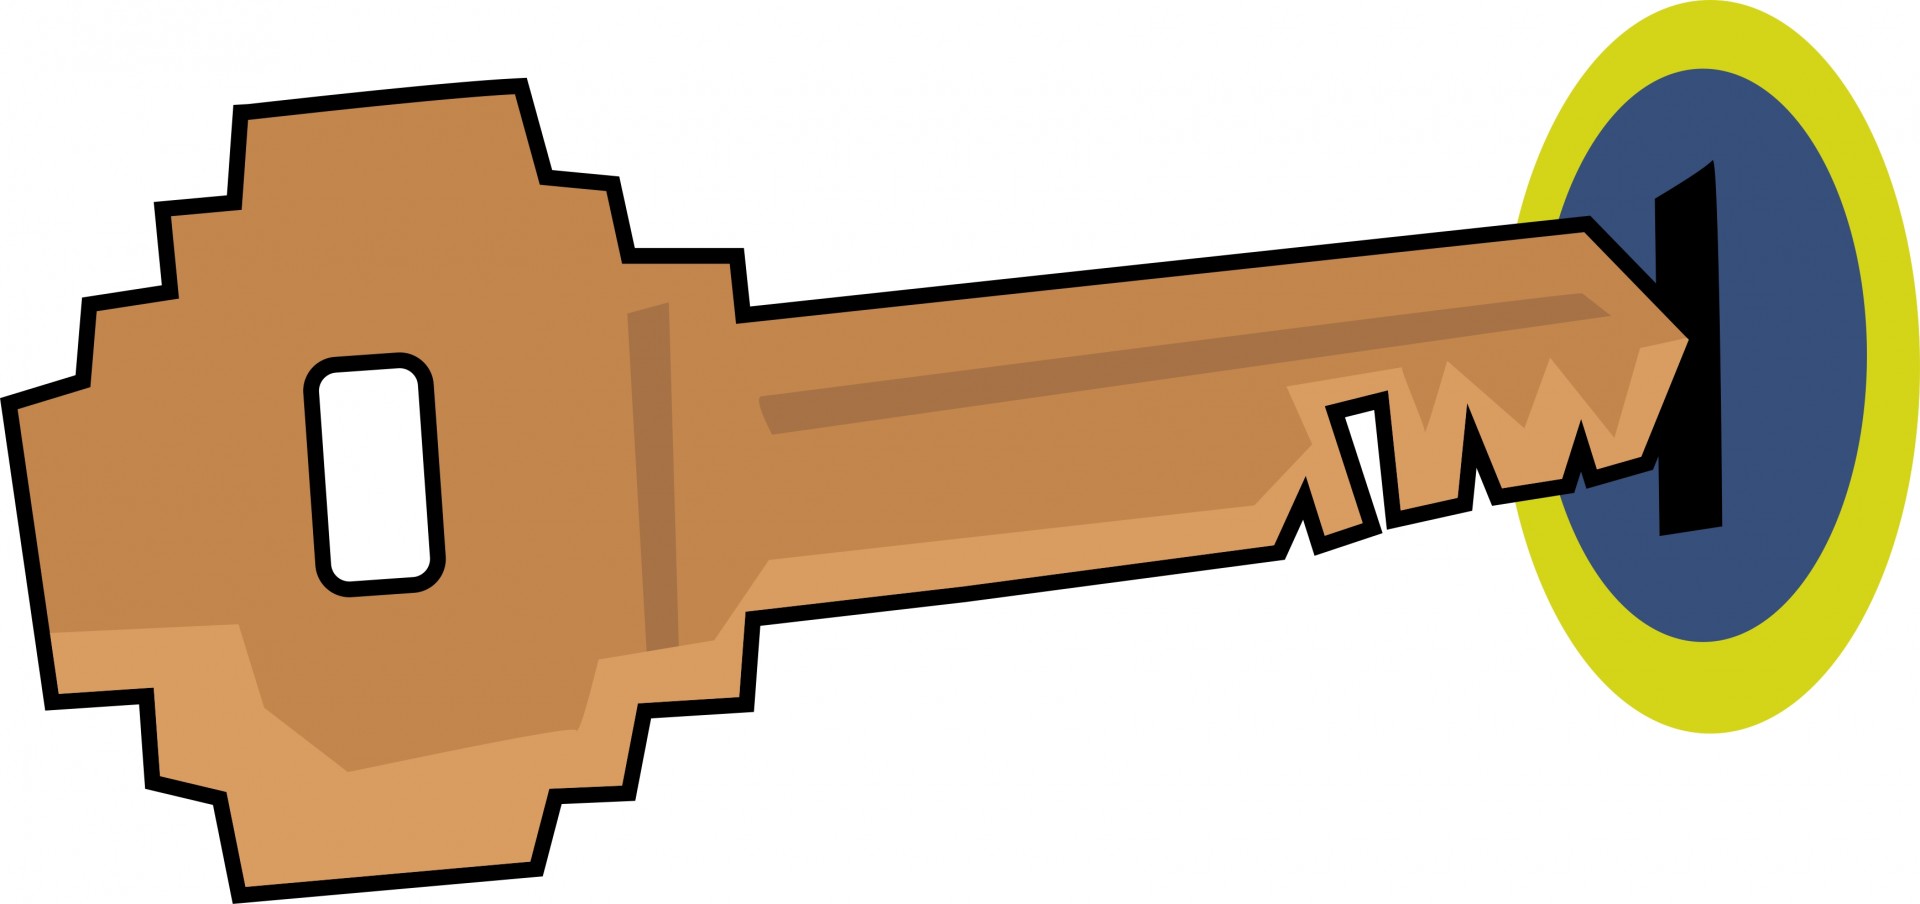 clip art pictures of keys - photo #47